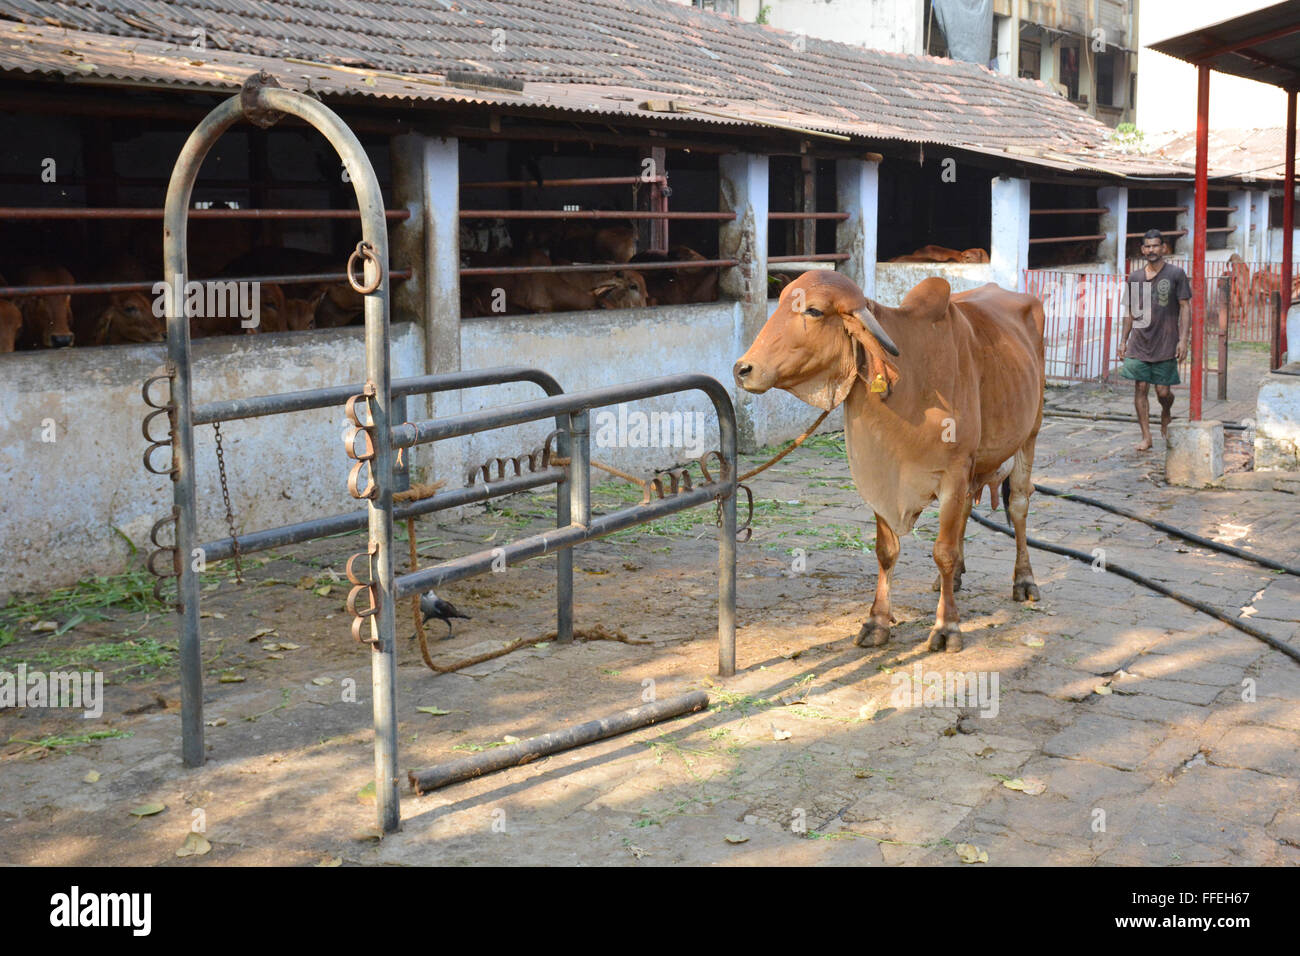 Mumbai, India - October 19, 2015 - Cow in a stable in the center of Mumbai between skyscrapers Stock Photo